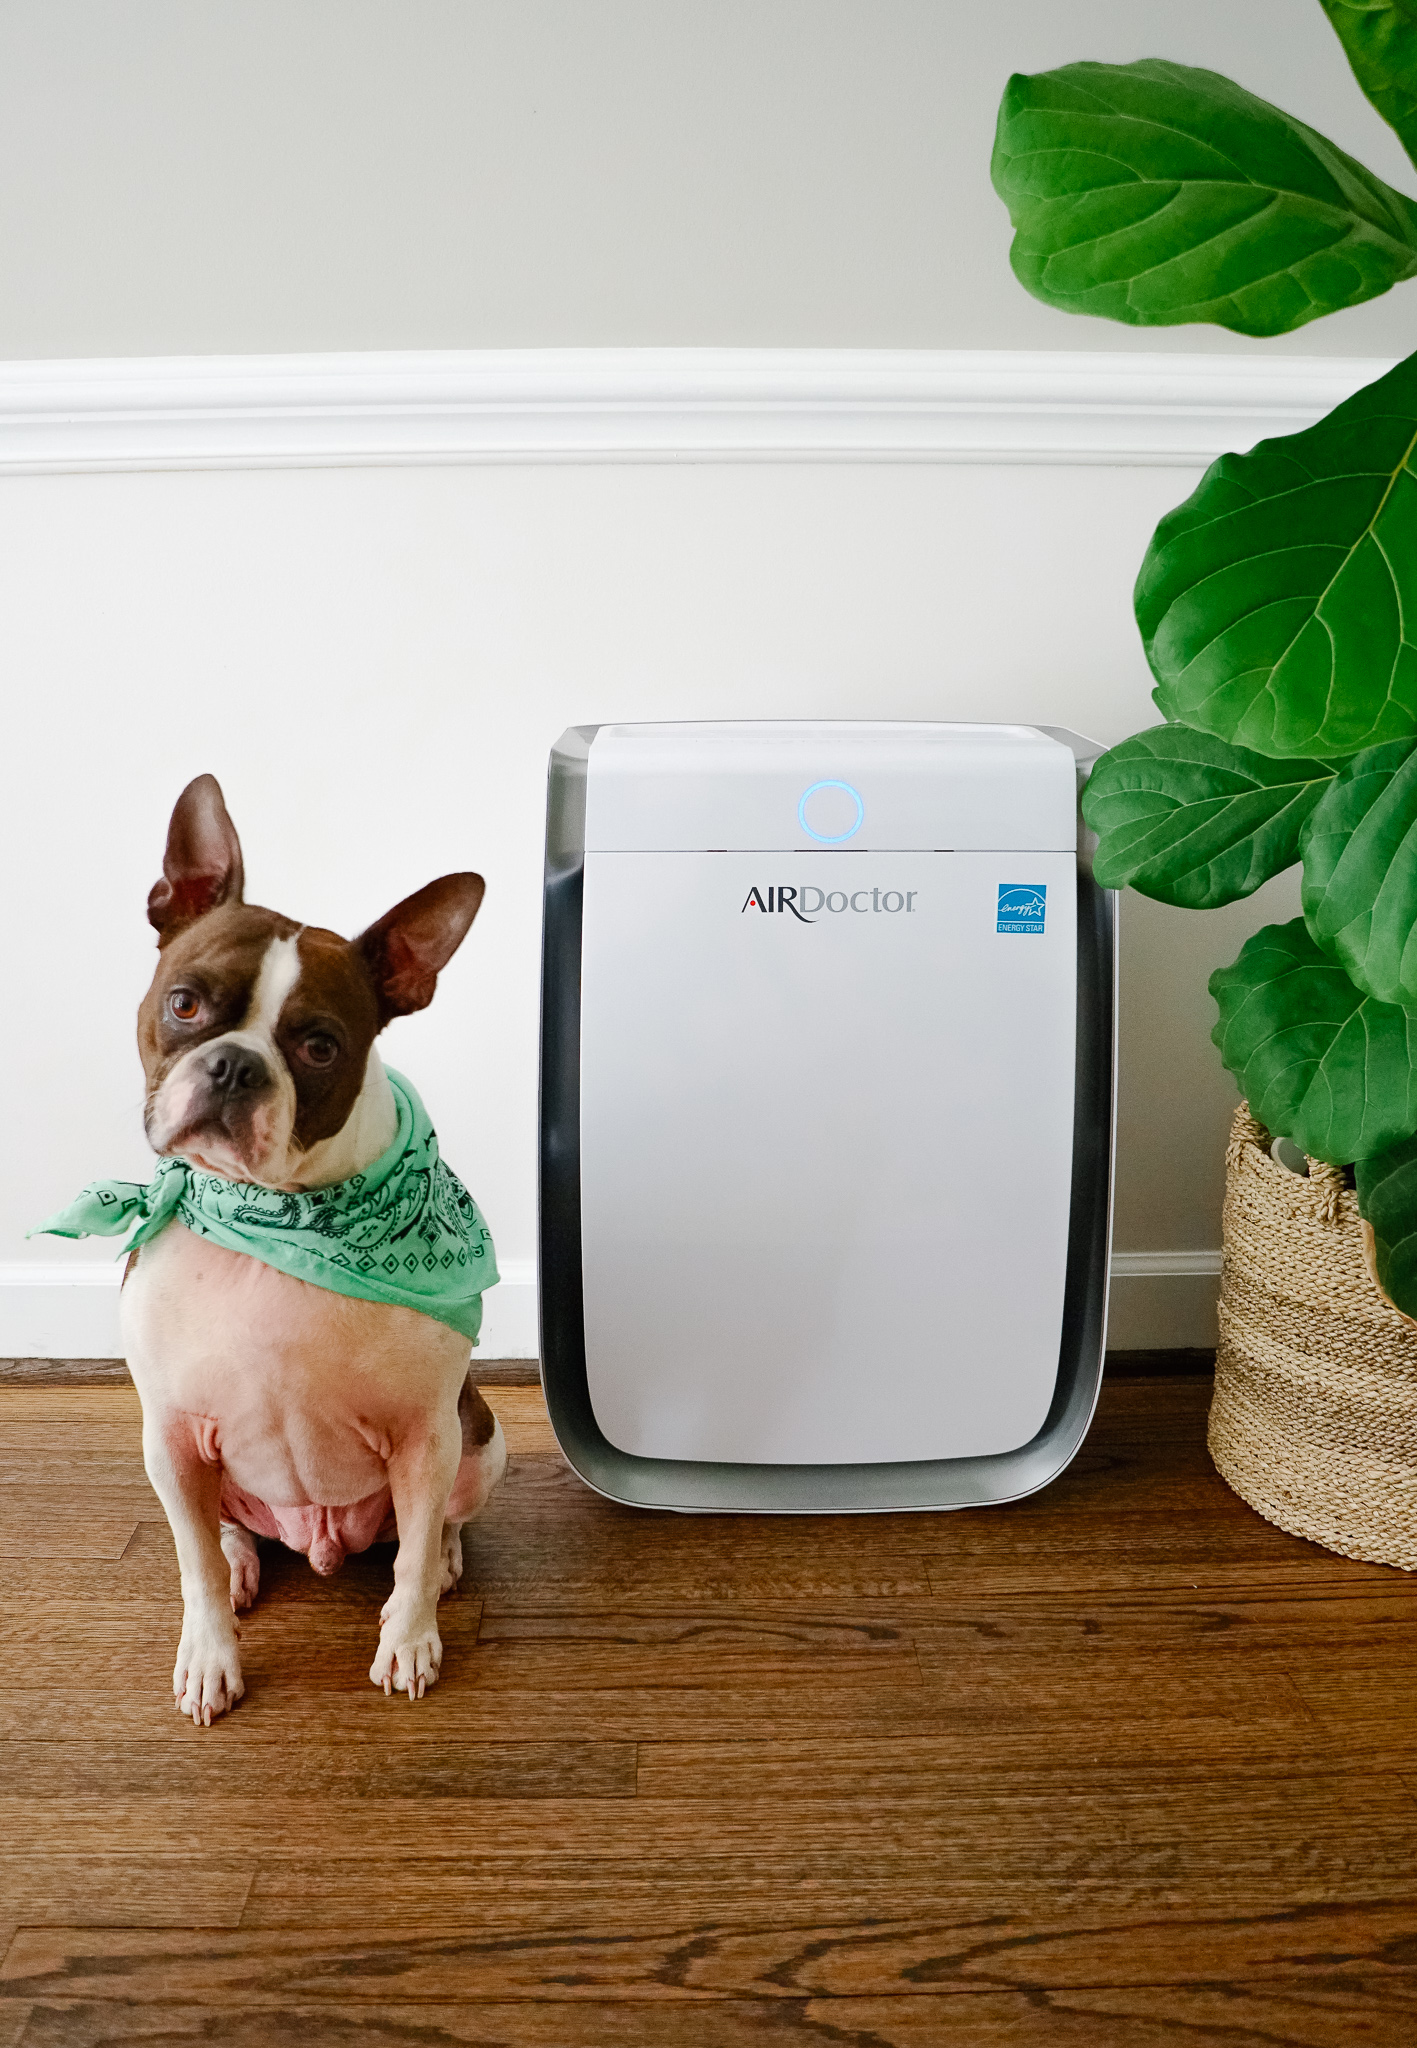 AirDoctor Review: The Best Air Purifier For The Money